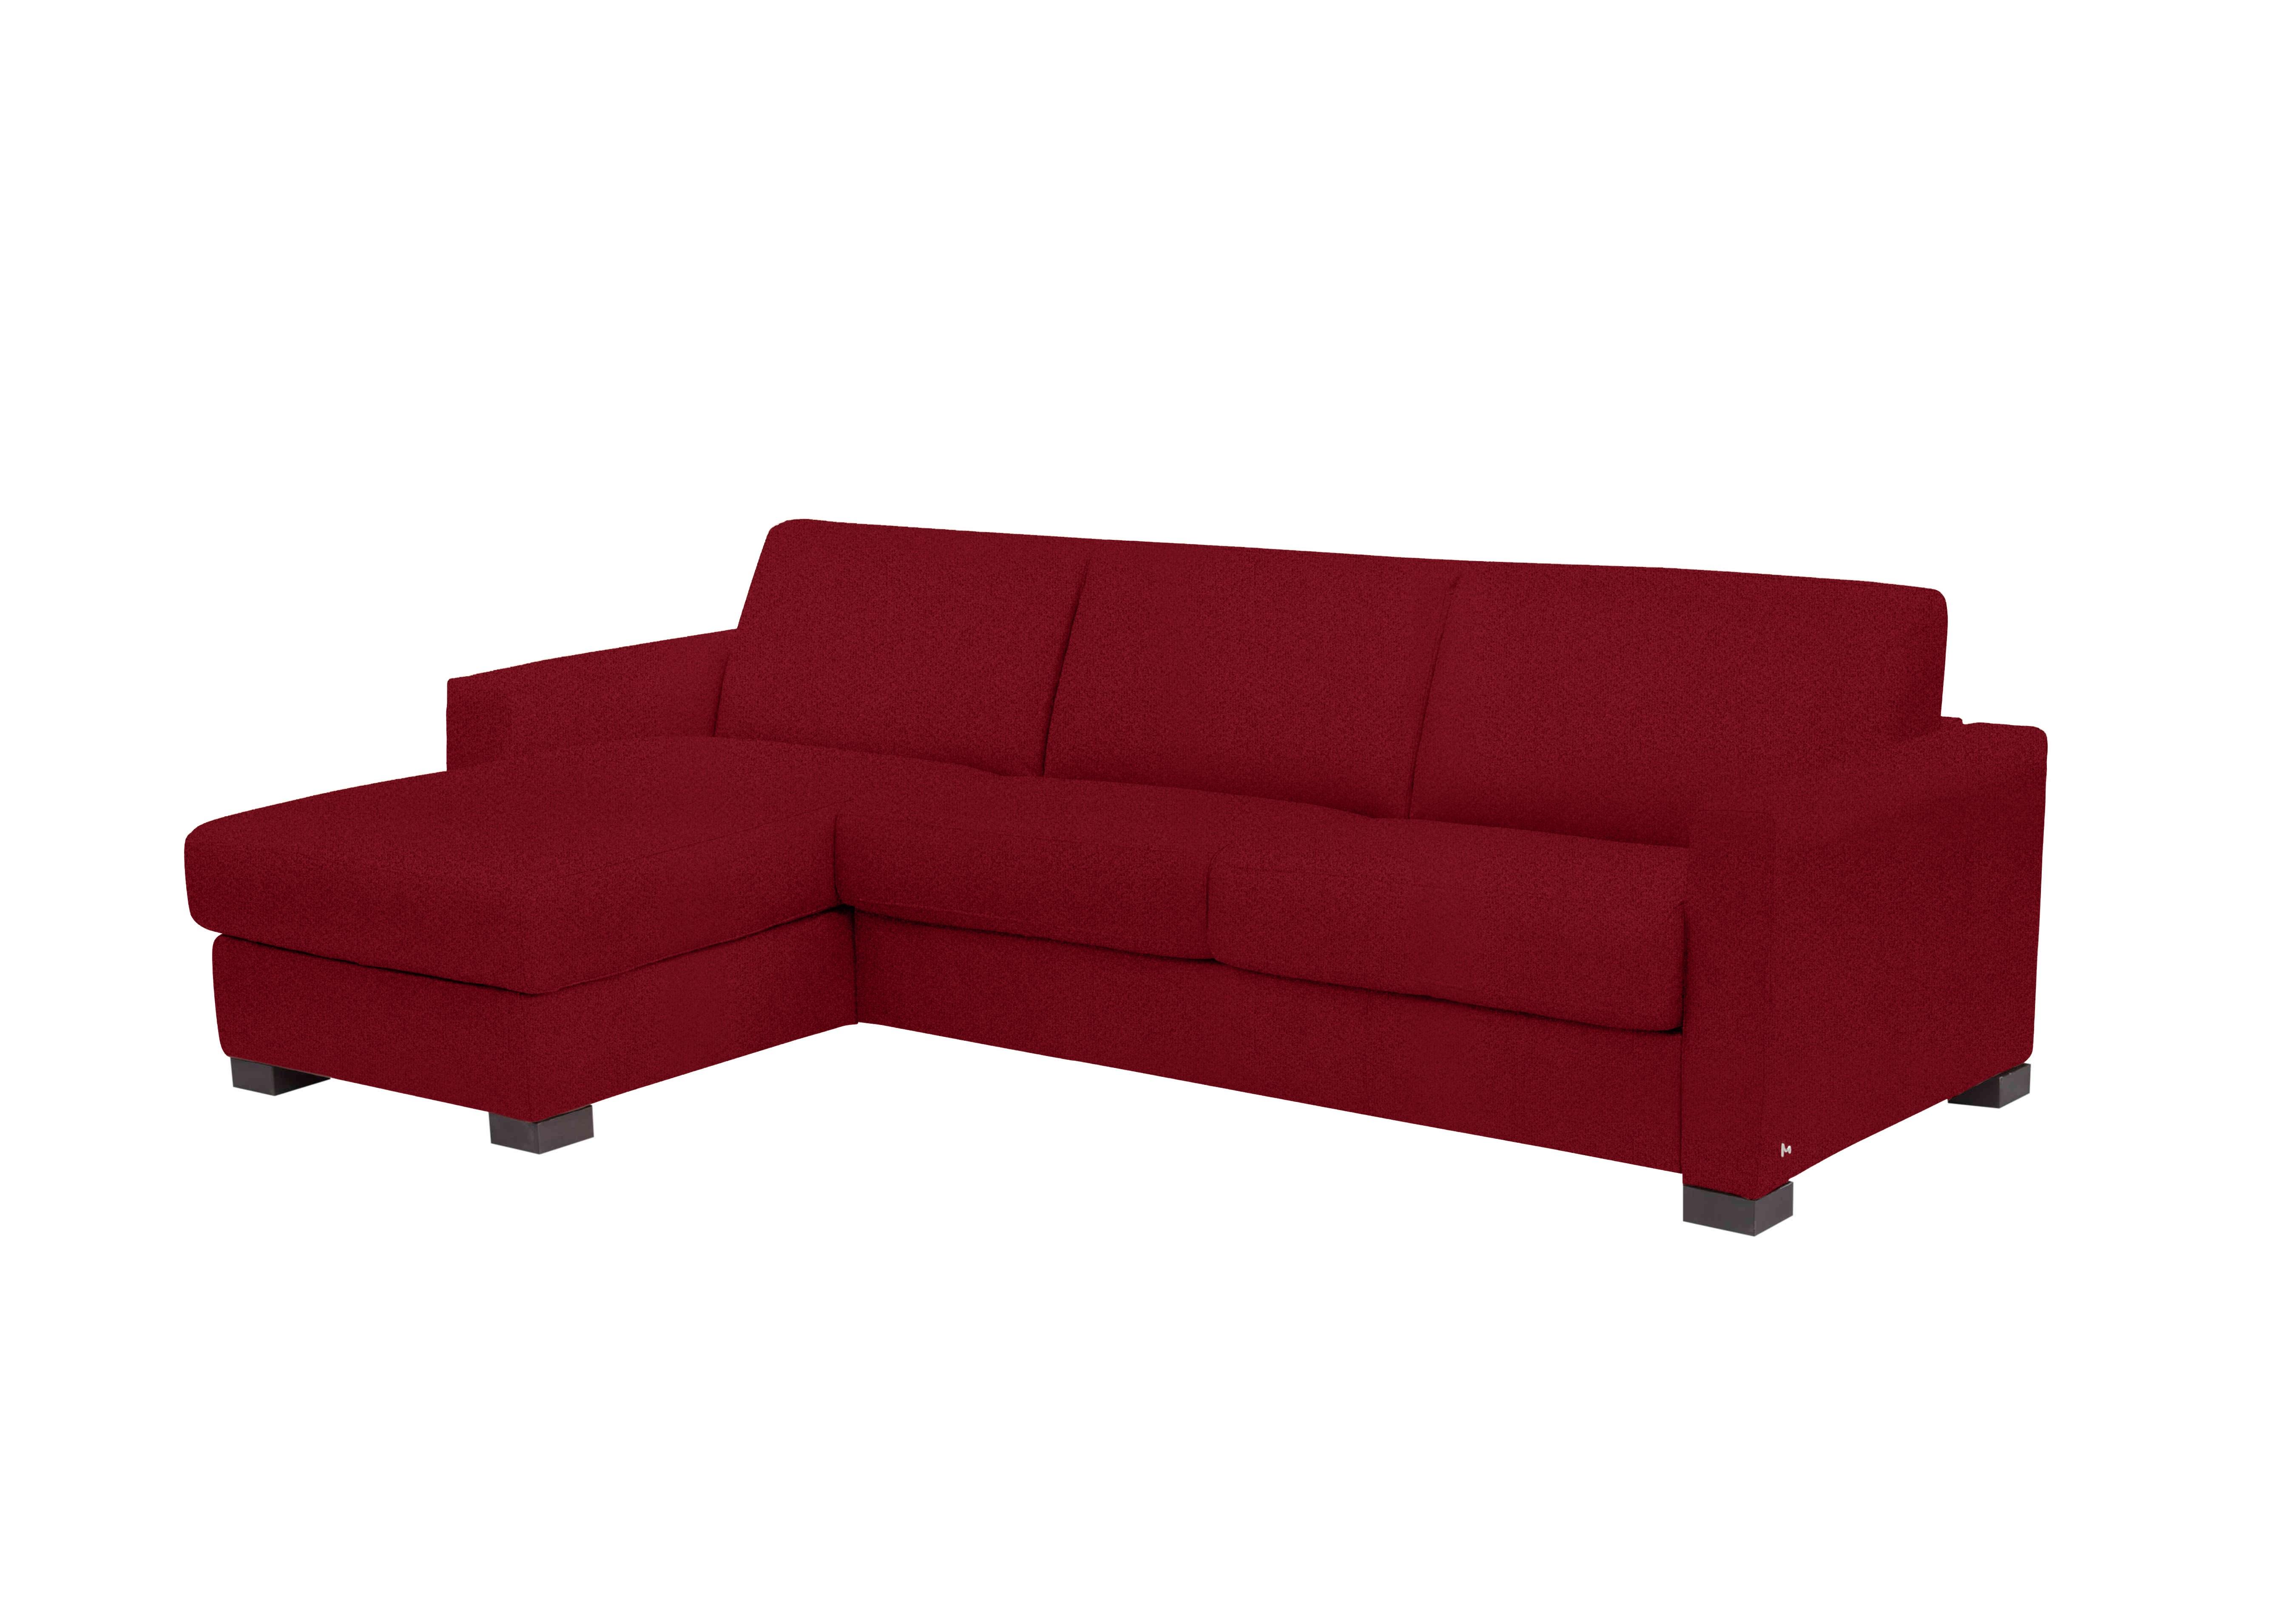 Alcova 3 Seater Fabric Sofa Bed with Storage Chaise with Box Arms in Coupe Rosso 305 on Furniture Village